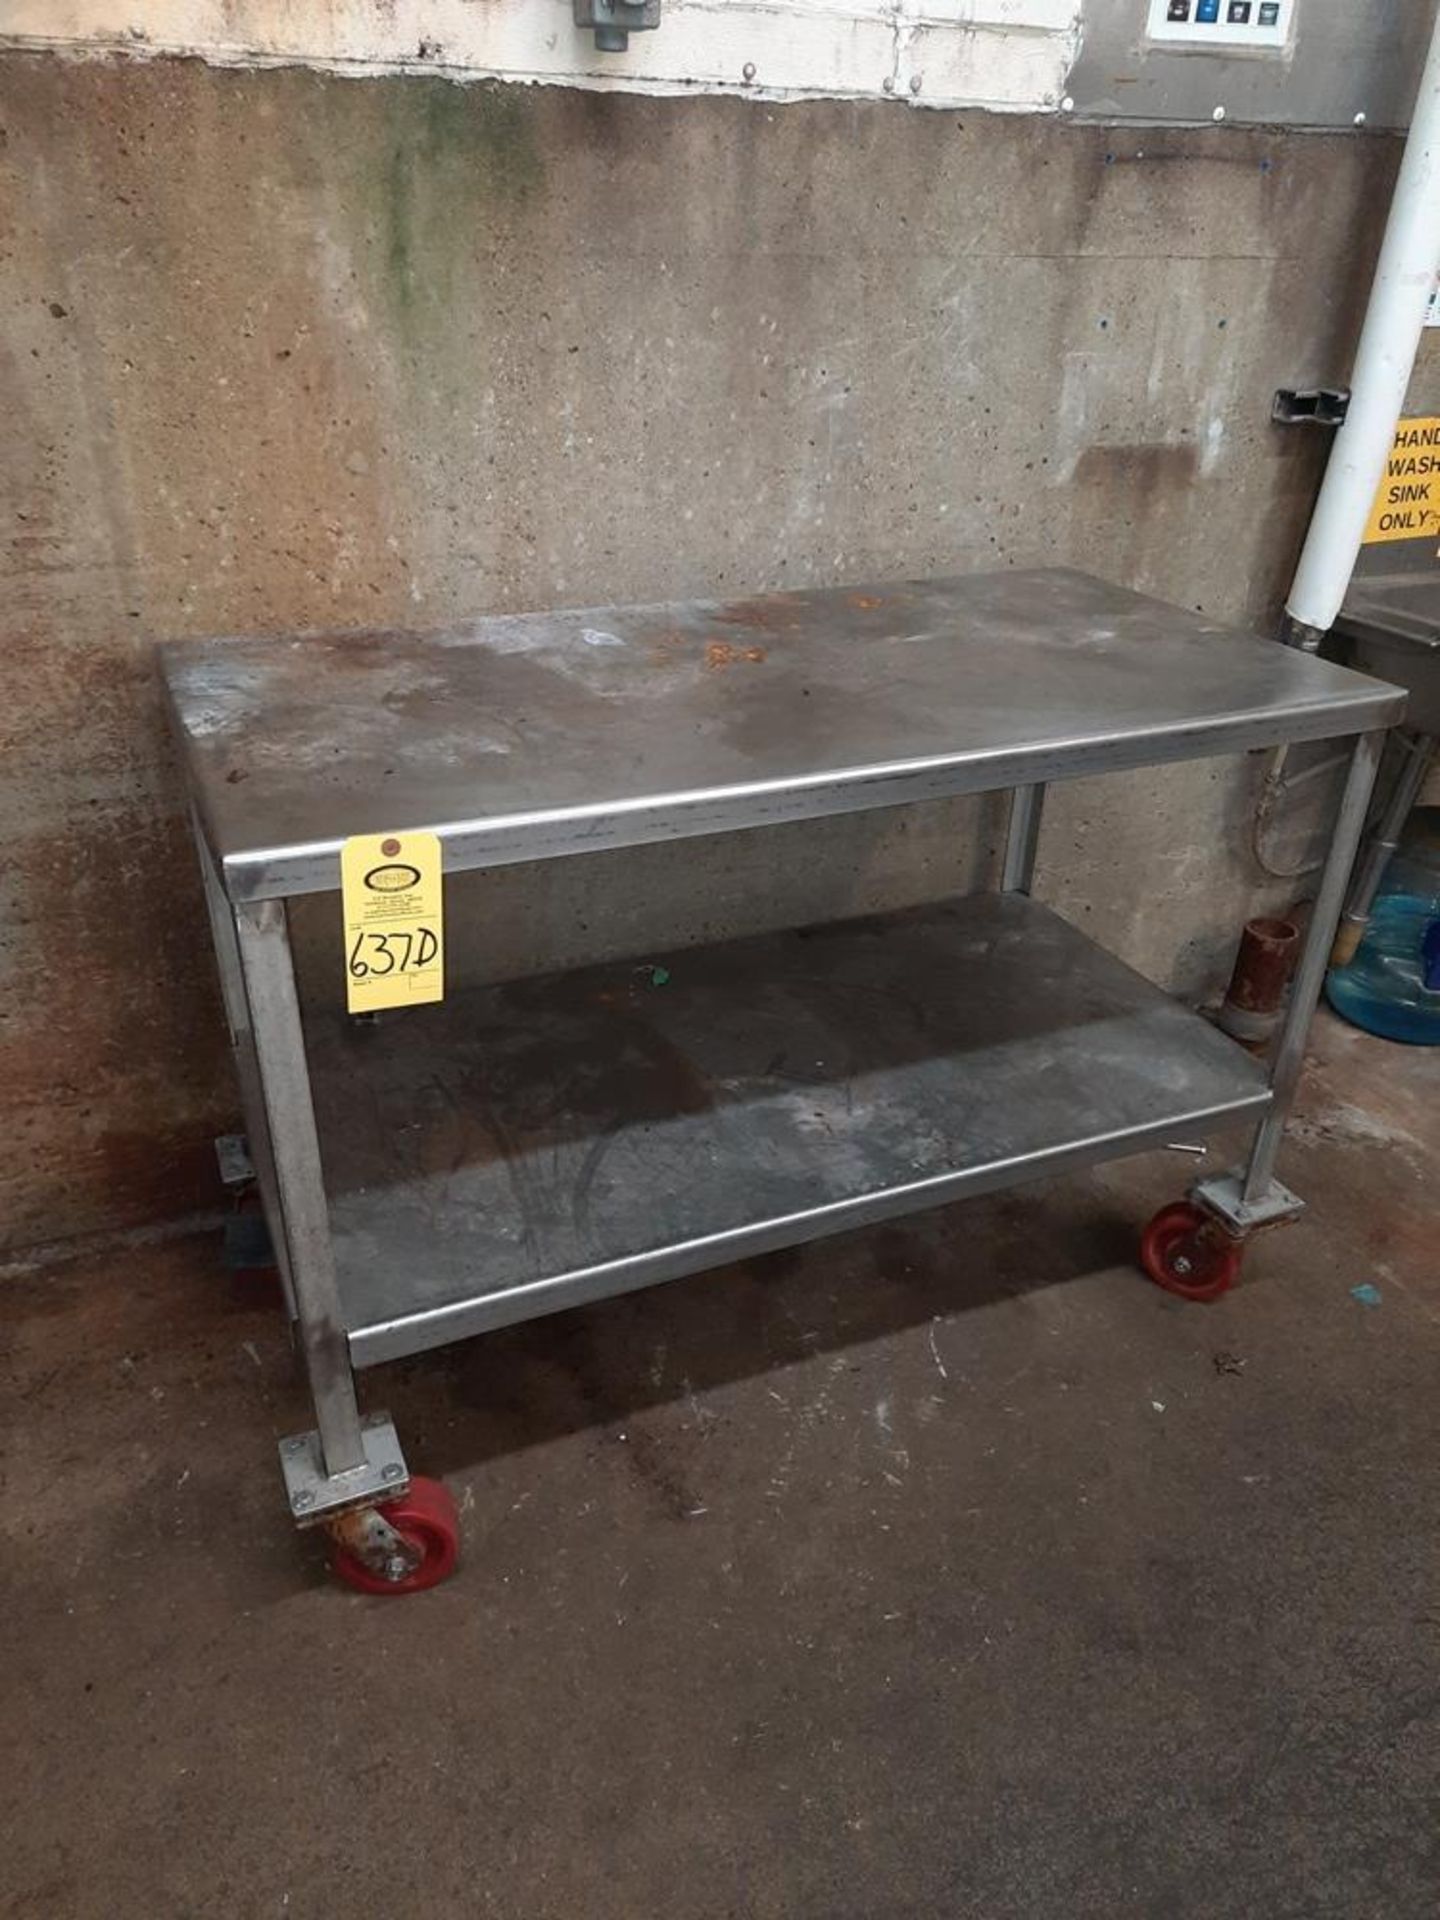 Portable Stainless Steel Table, 2' W X 4' L: Required Loading Fee $50.00, Rigger-Norm Pavlish,